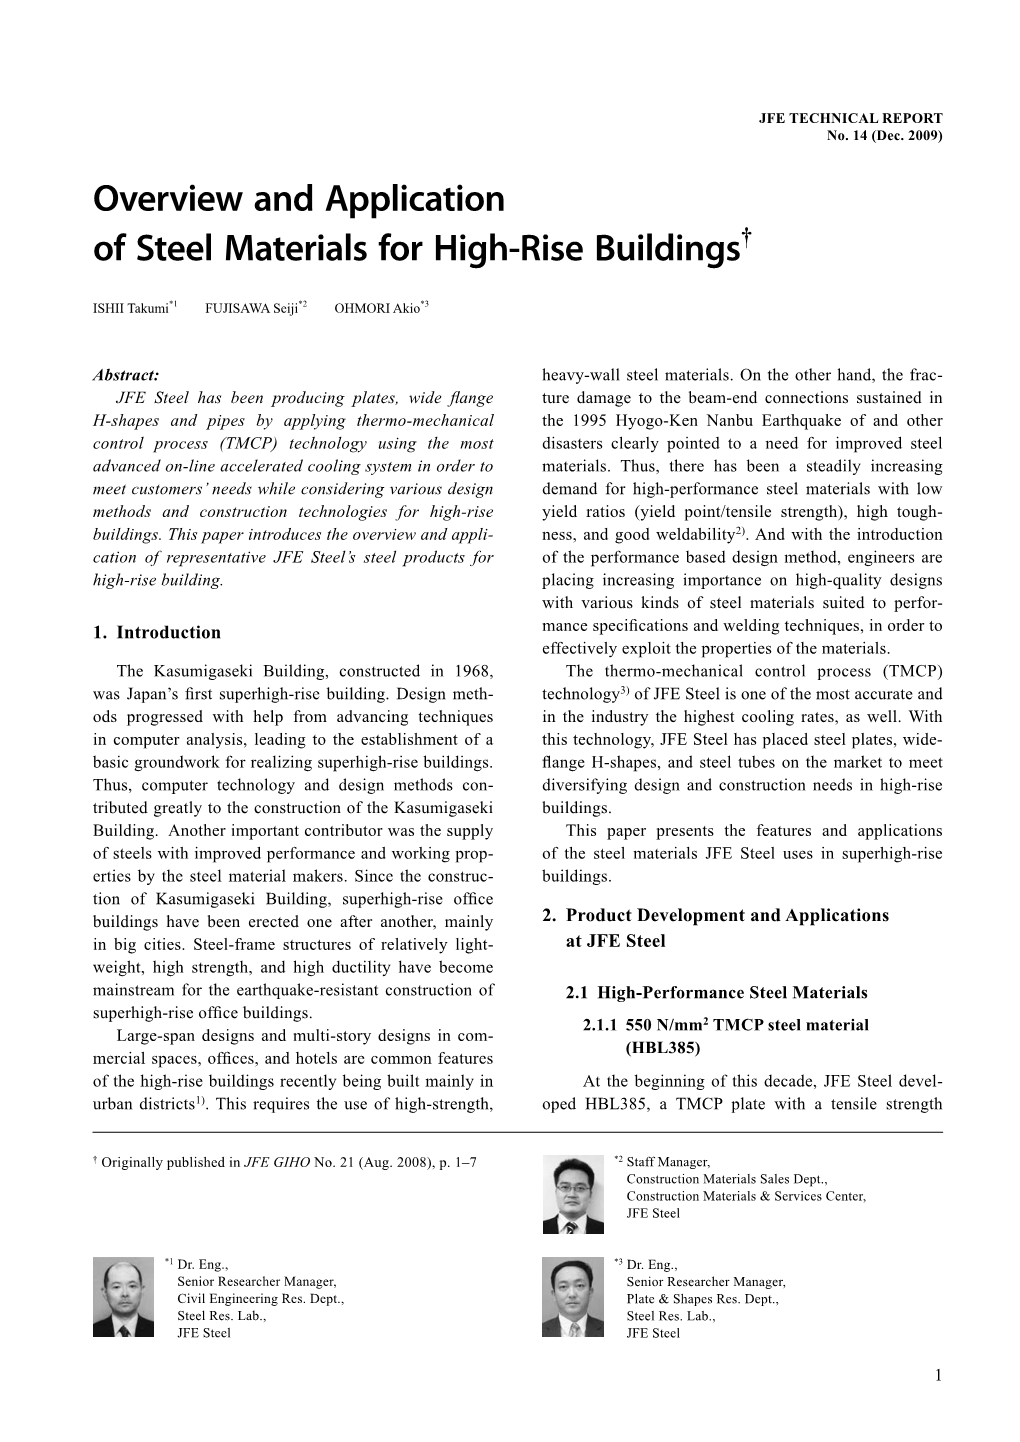 Overview and Application of Steel Materials for High-Rise Buildings†